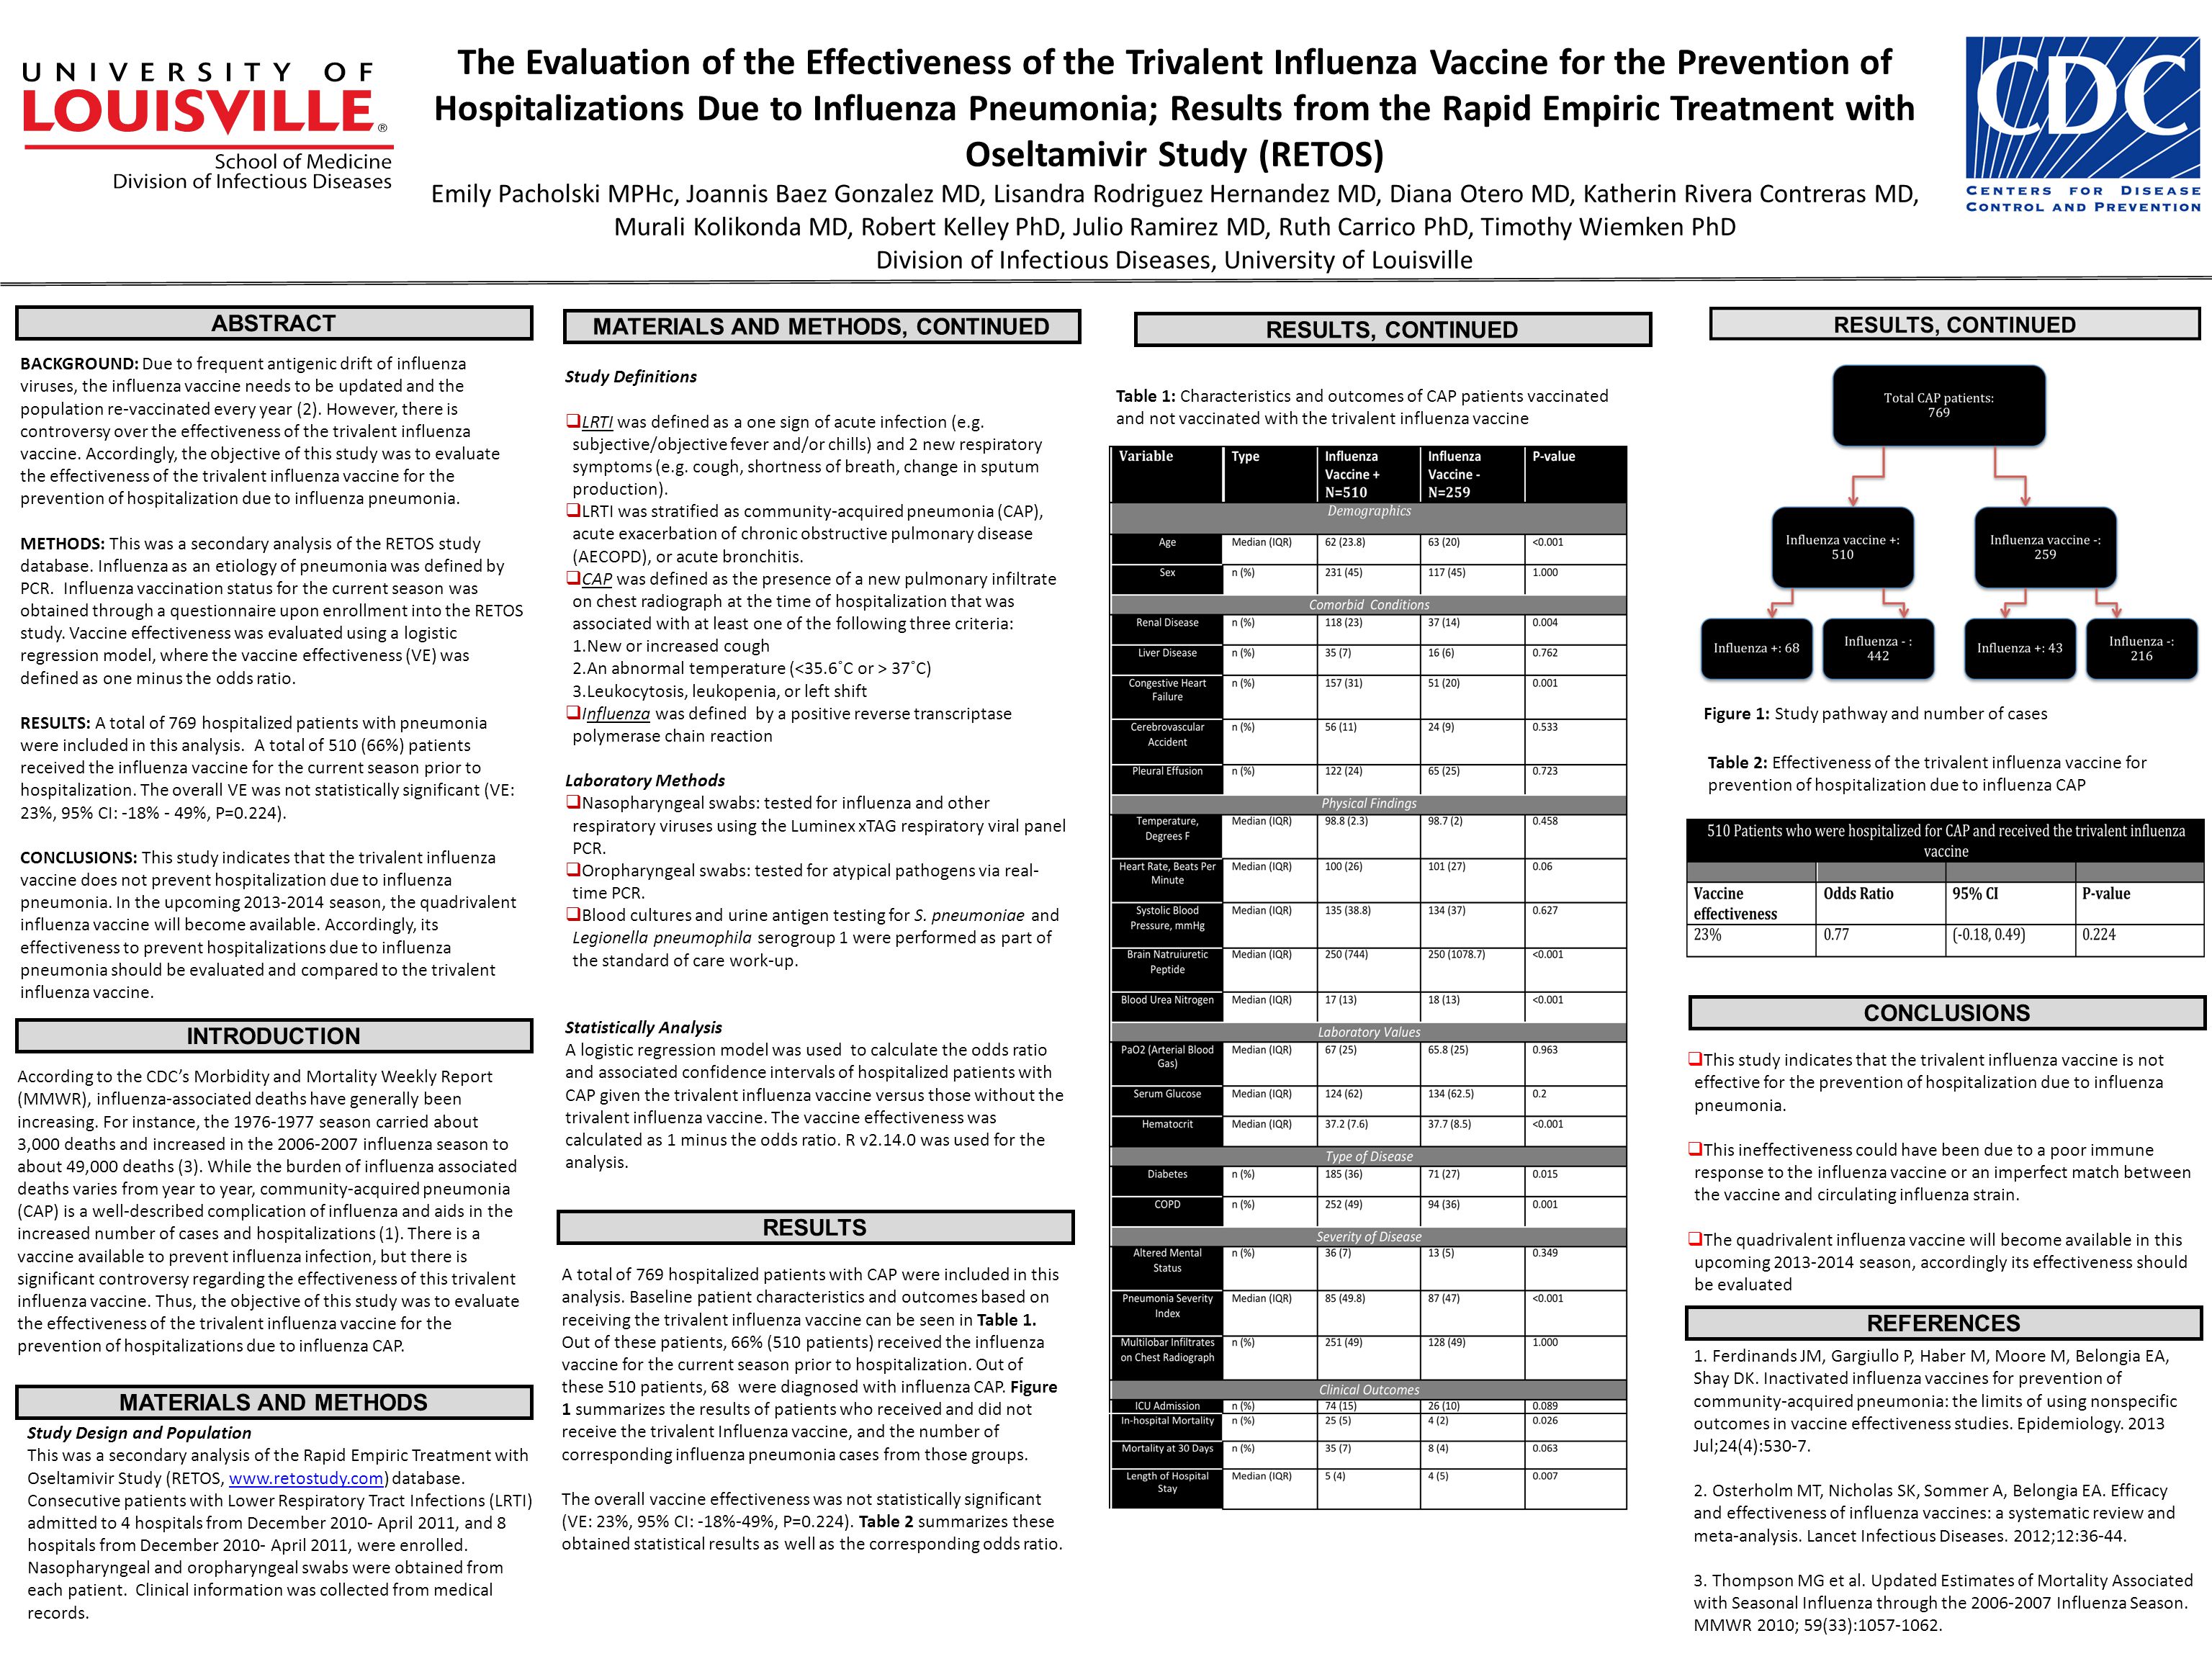 The Evaluation of the Effectiveness of the Trivalent Influenza Vaccine for the Prevention of Hospitalizations Due to Influenza Pneumonia; Results from the Rapid Empiric Treatment with Oseltamivir Study (RETOS) Emily Pacholski MPHc, Joannis Baez Gonzalez MD, Lisandra Rodriguez Hernandez MD, Diana Otero MD, Katherin Rivera Contreras MD, Murali Kolikonda MD, Robert Kelley PhD, Julio Ramirez MD, Ruth Carrico PhD, Timothy Wiemken PhD Division of Infectious Diseases, University of Louisville ABSTRACT MATERIALS AND METHODS, CONTINUED RESULTS, CONTINUED REFERENCES BACKGROUND: Due to frequent antigenic drift of influenza viruses, the influenza vaccine needs to be updated and the population re-vaccinated every year (2).